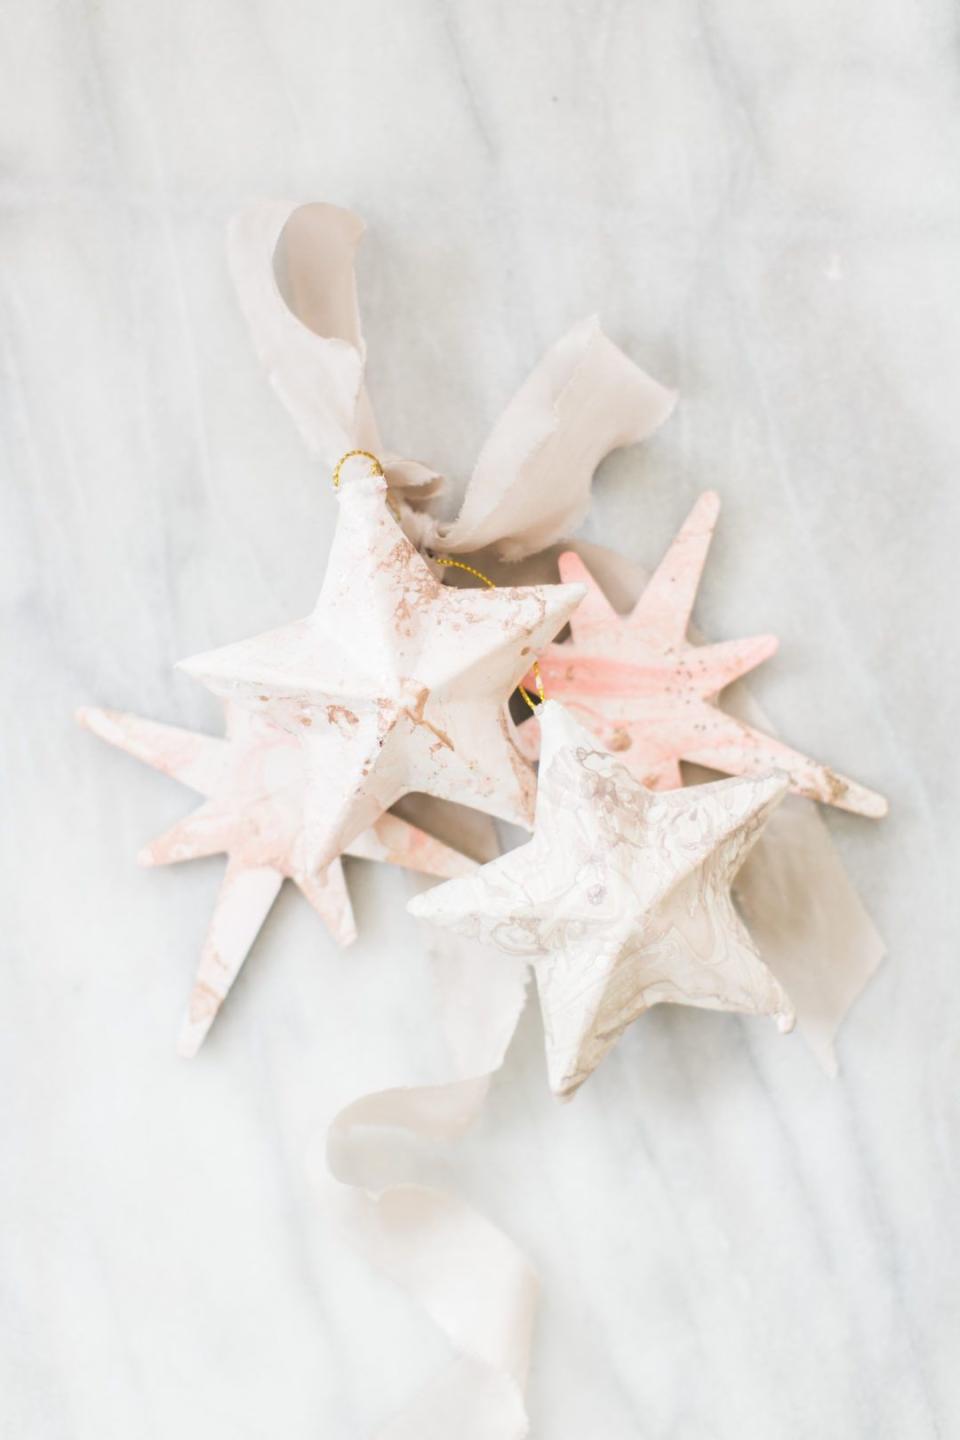 19) Marble Star Ornaments